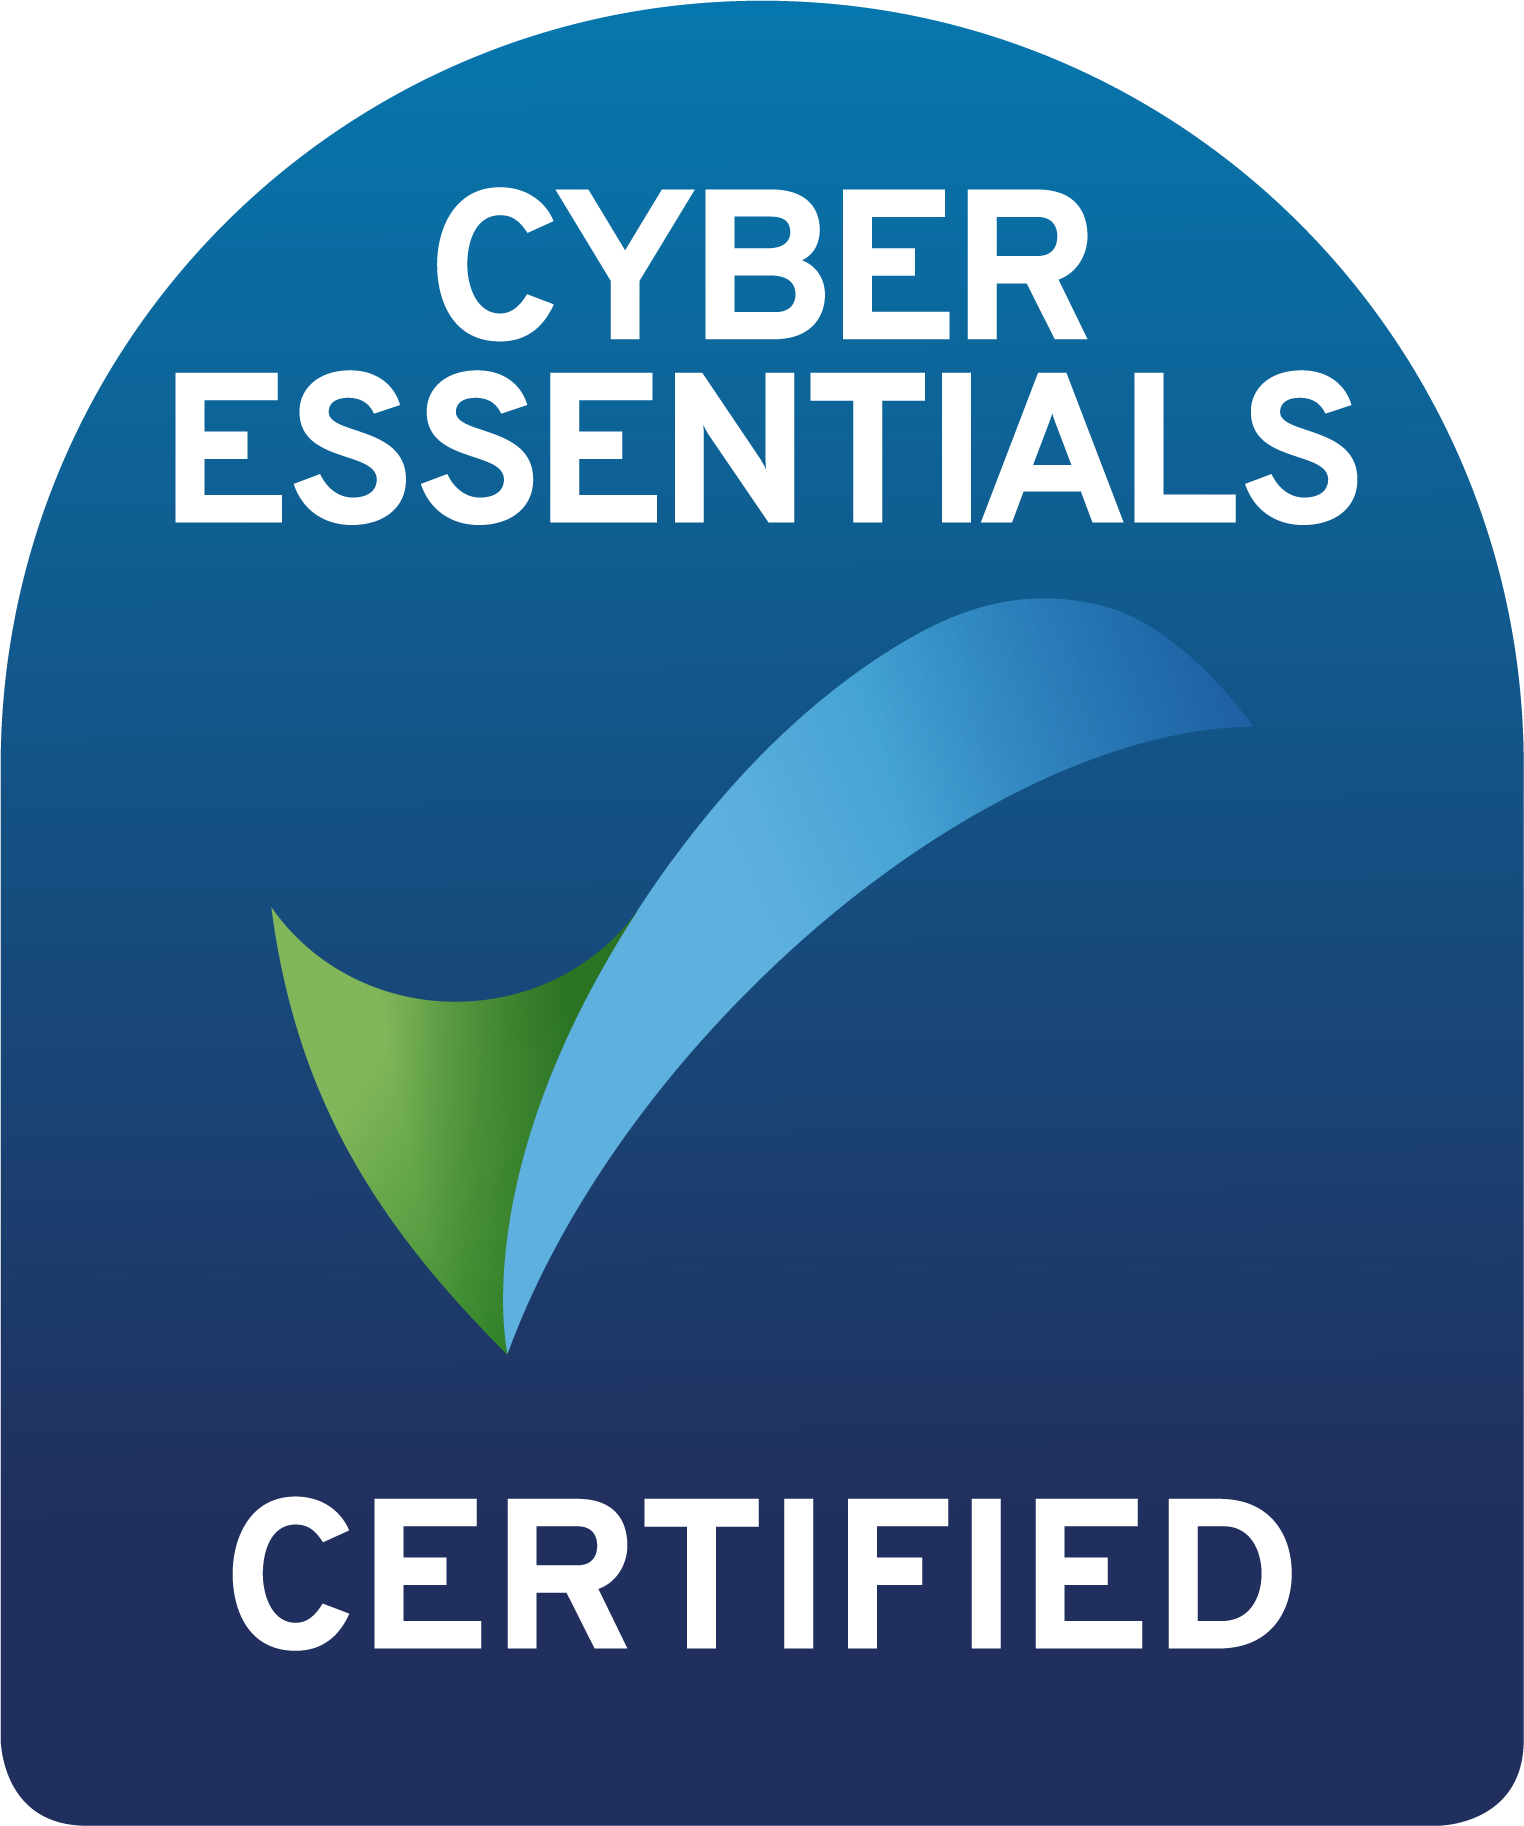 CyberEssentials certified company mark